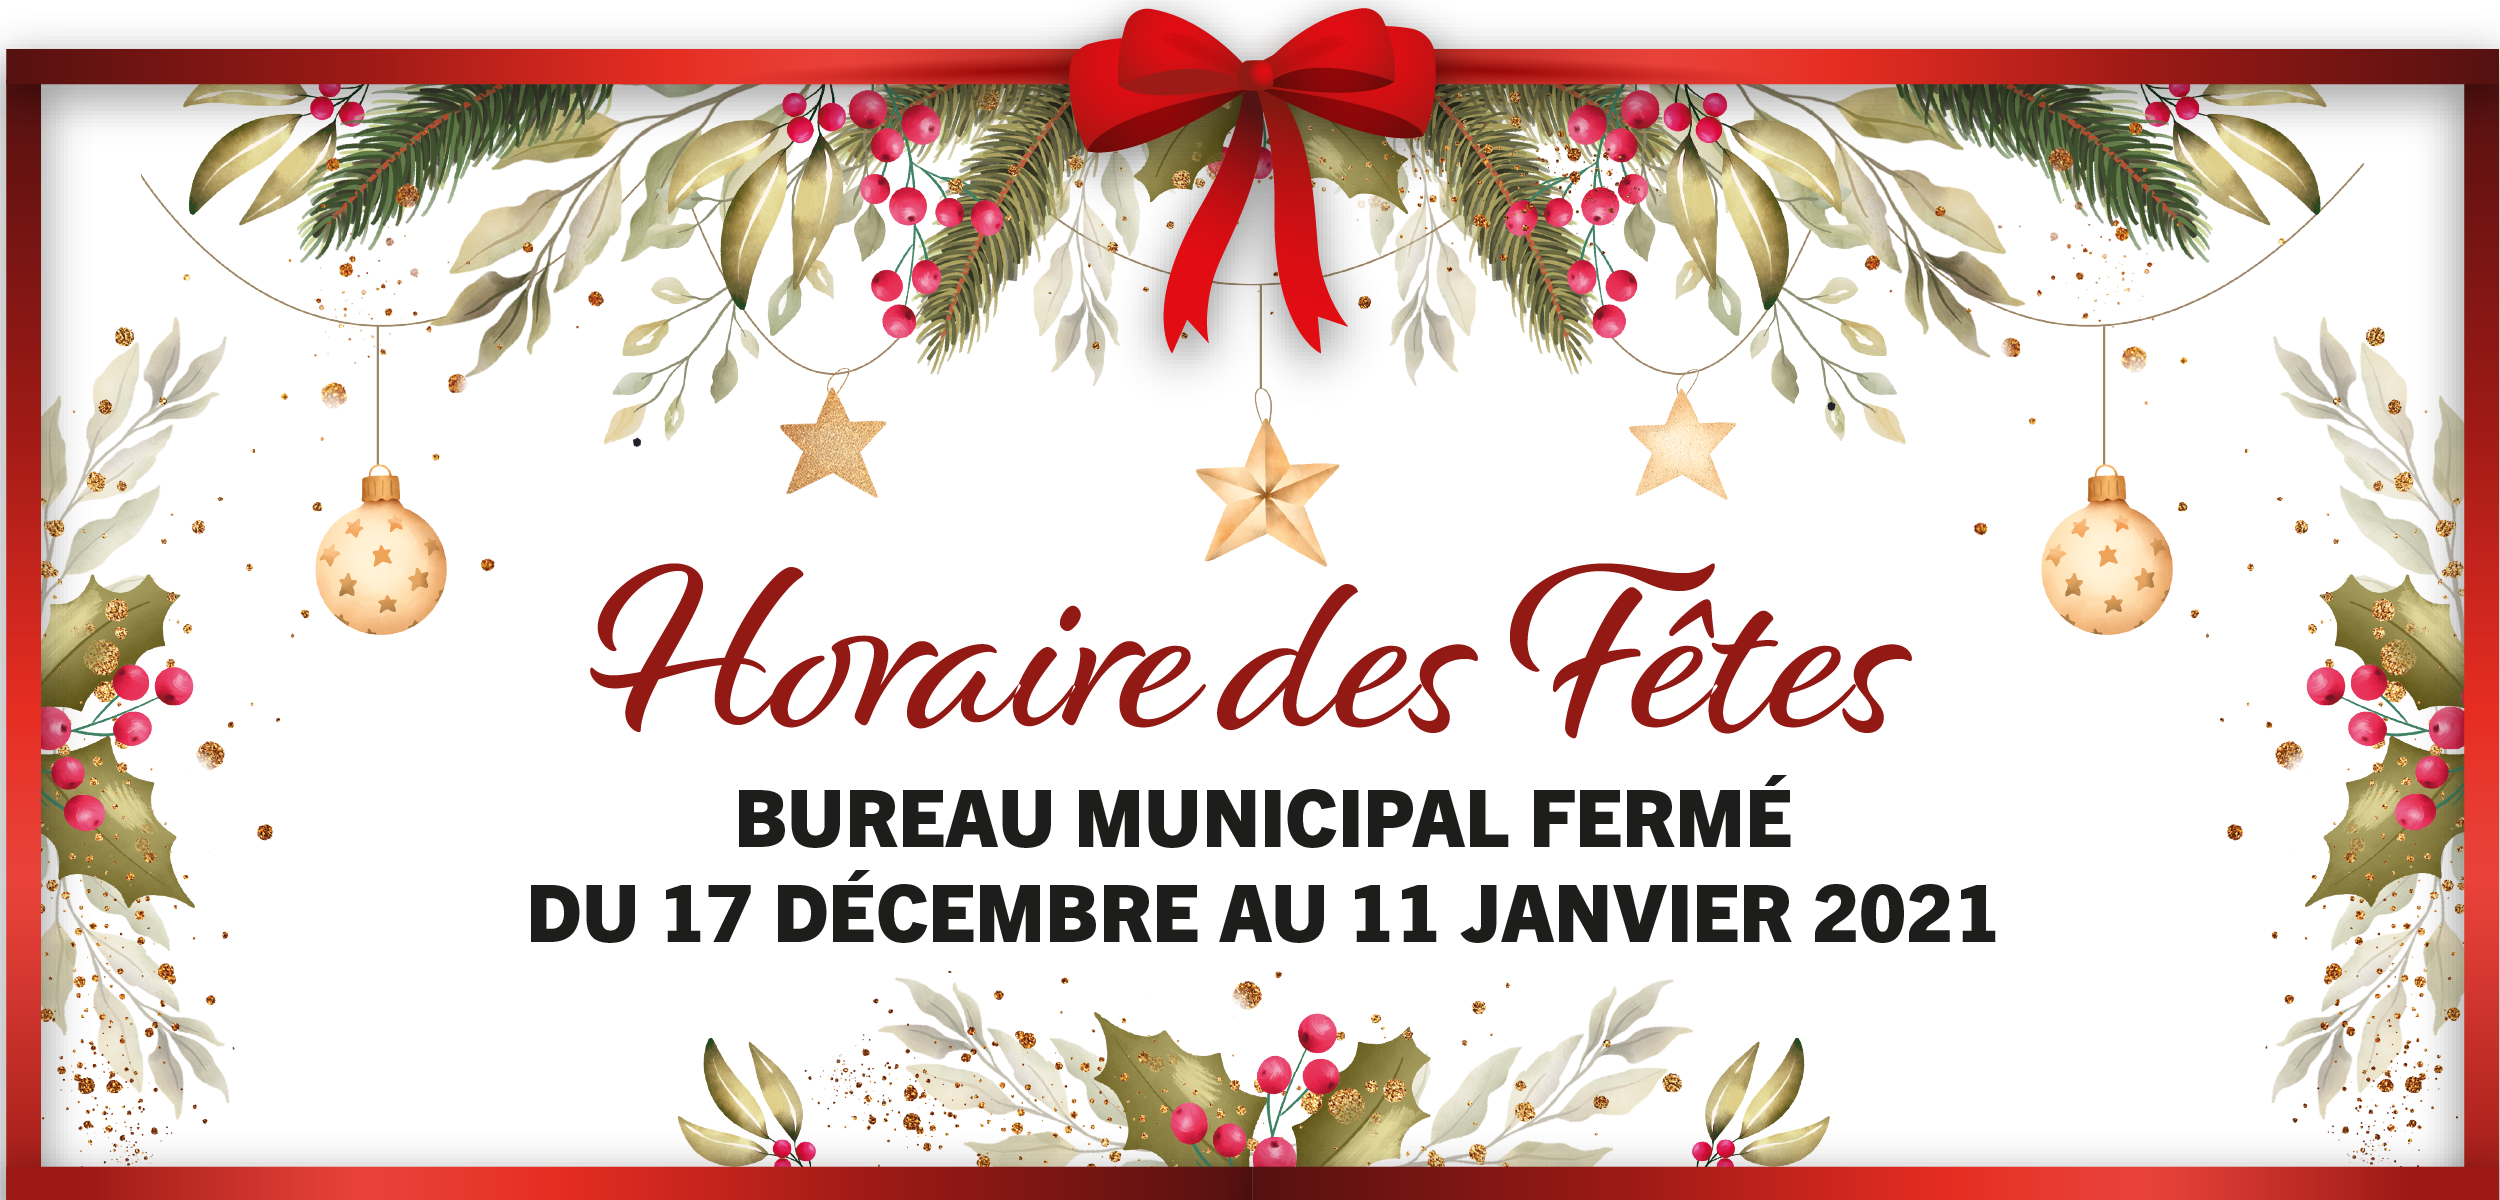 You are currently viewing Horaire des Fêtes